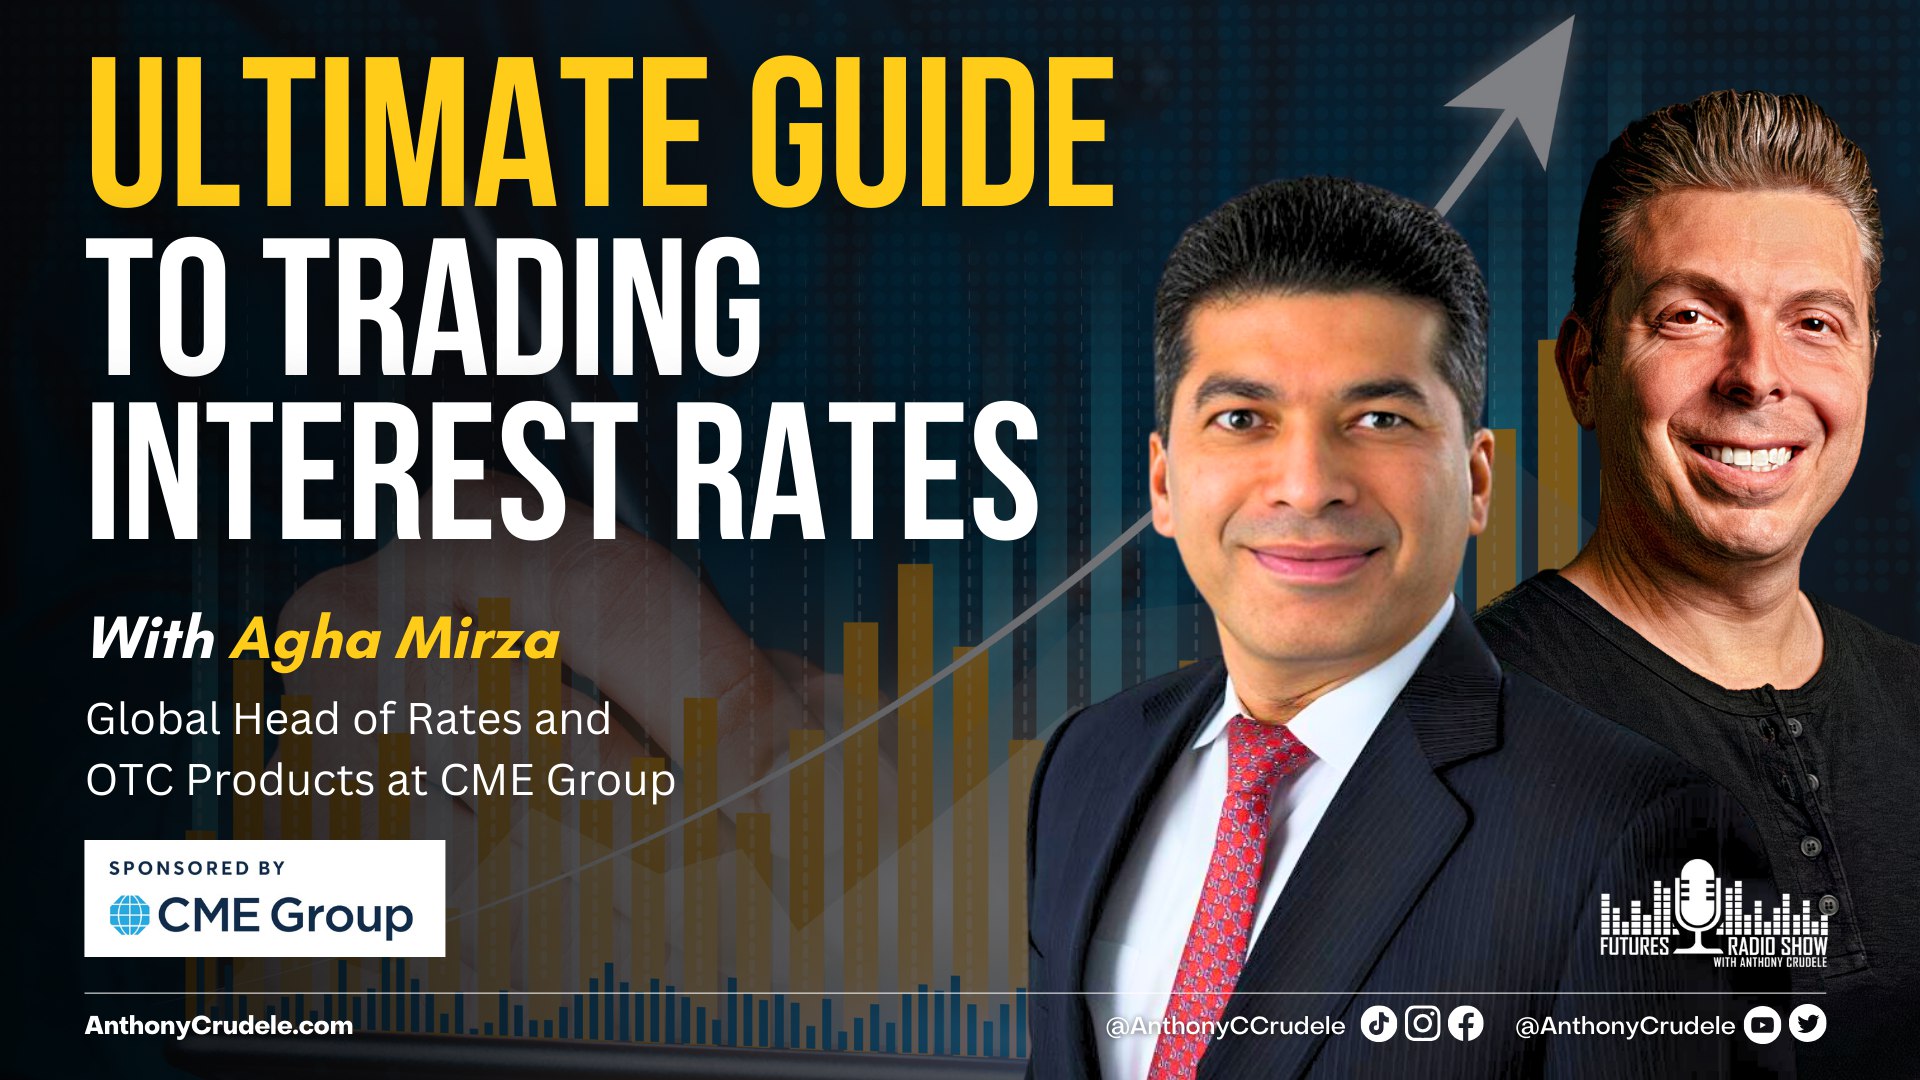 The Ultimate Guide to Trading Interest Rates with Agha Mirza